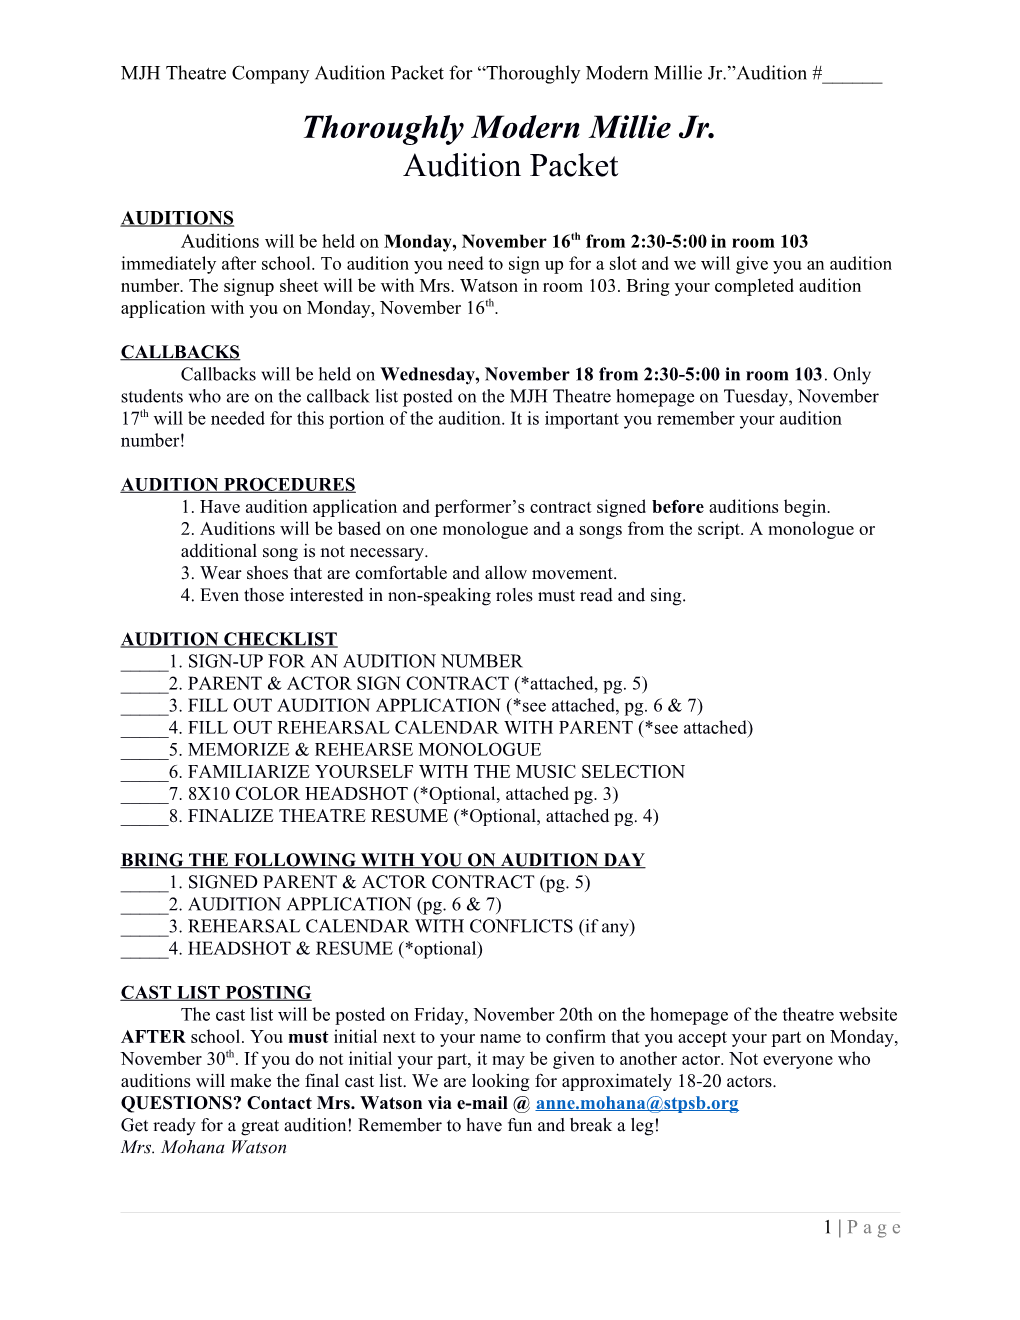 MJH Theatre Company Audition Packet for Thoroughly Modern Millie Jr. Audition #______